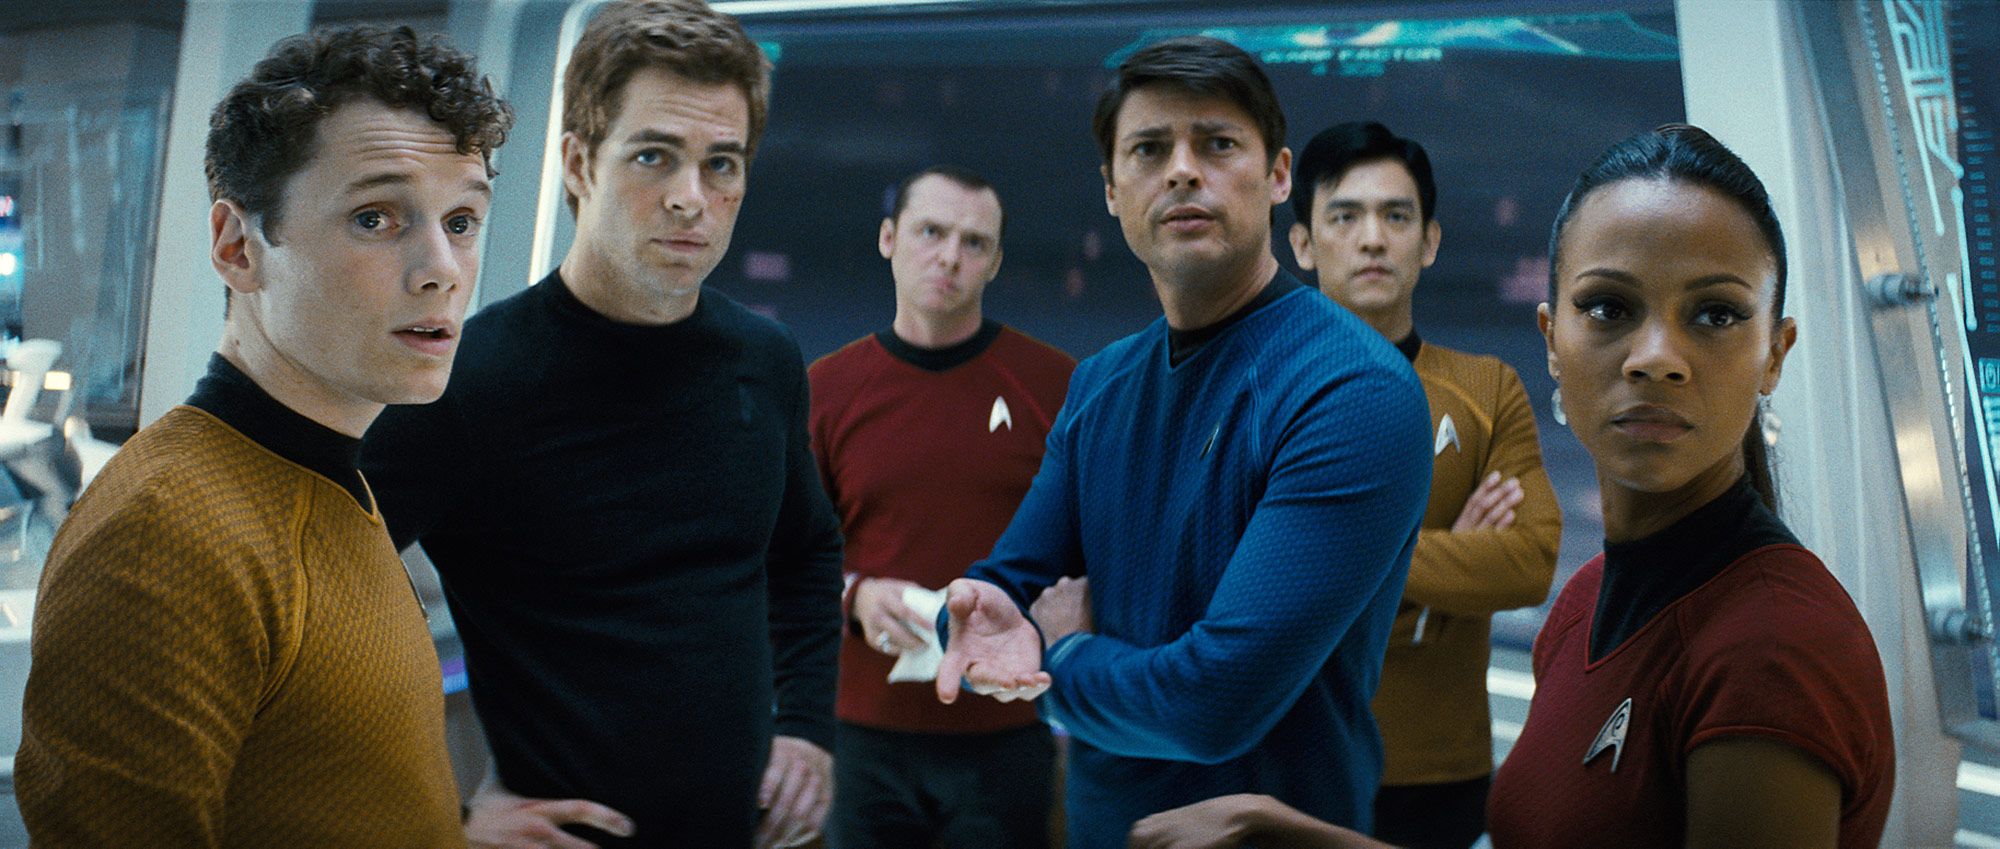 J.J. Abrams Goes Into Warp Speed with Star Trek 2 and Beyond